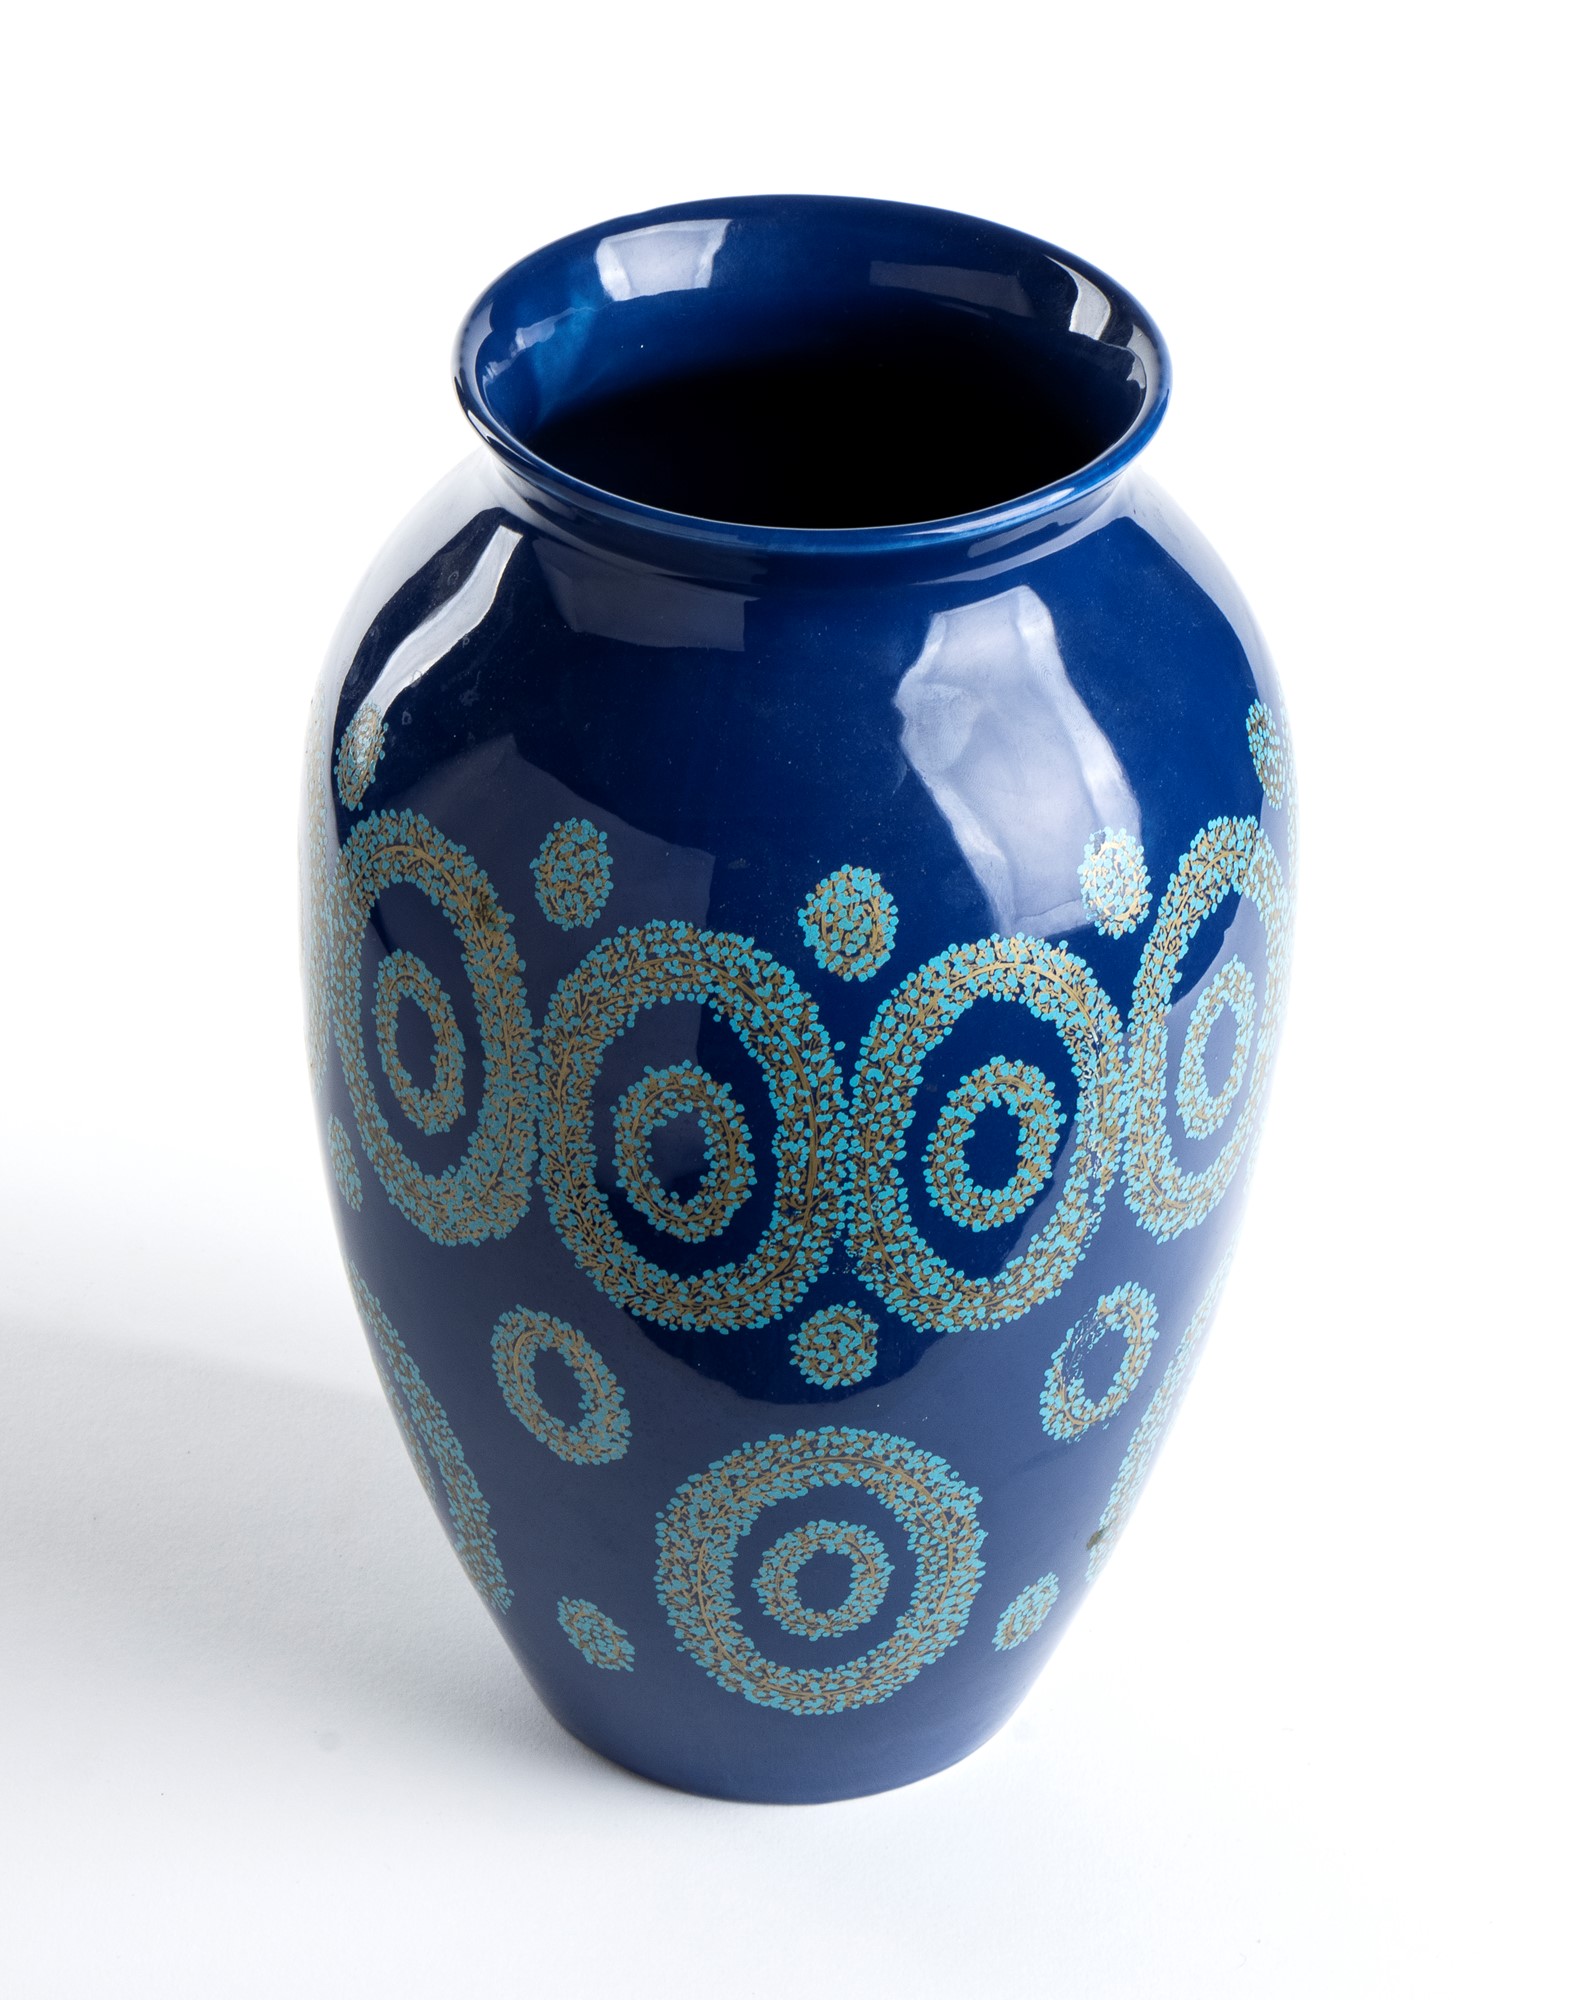 Blue ceramic vase with special celestial decorations and gold highlights - Image 7 of 11